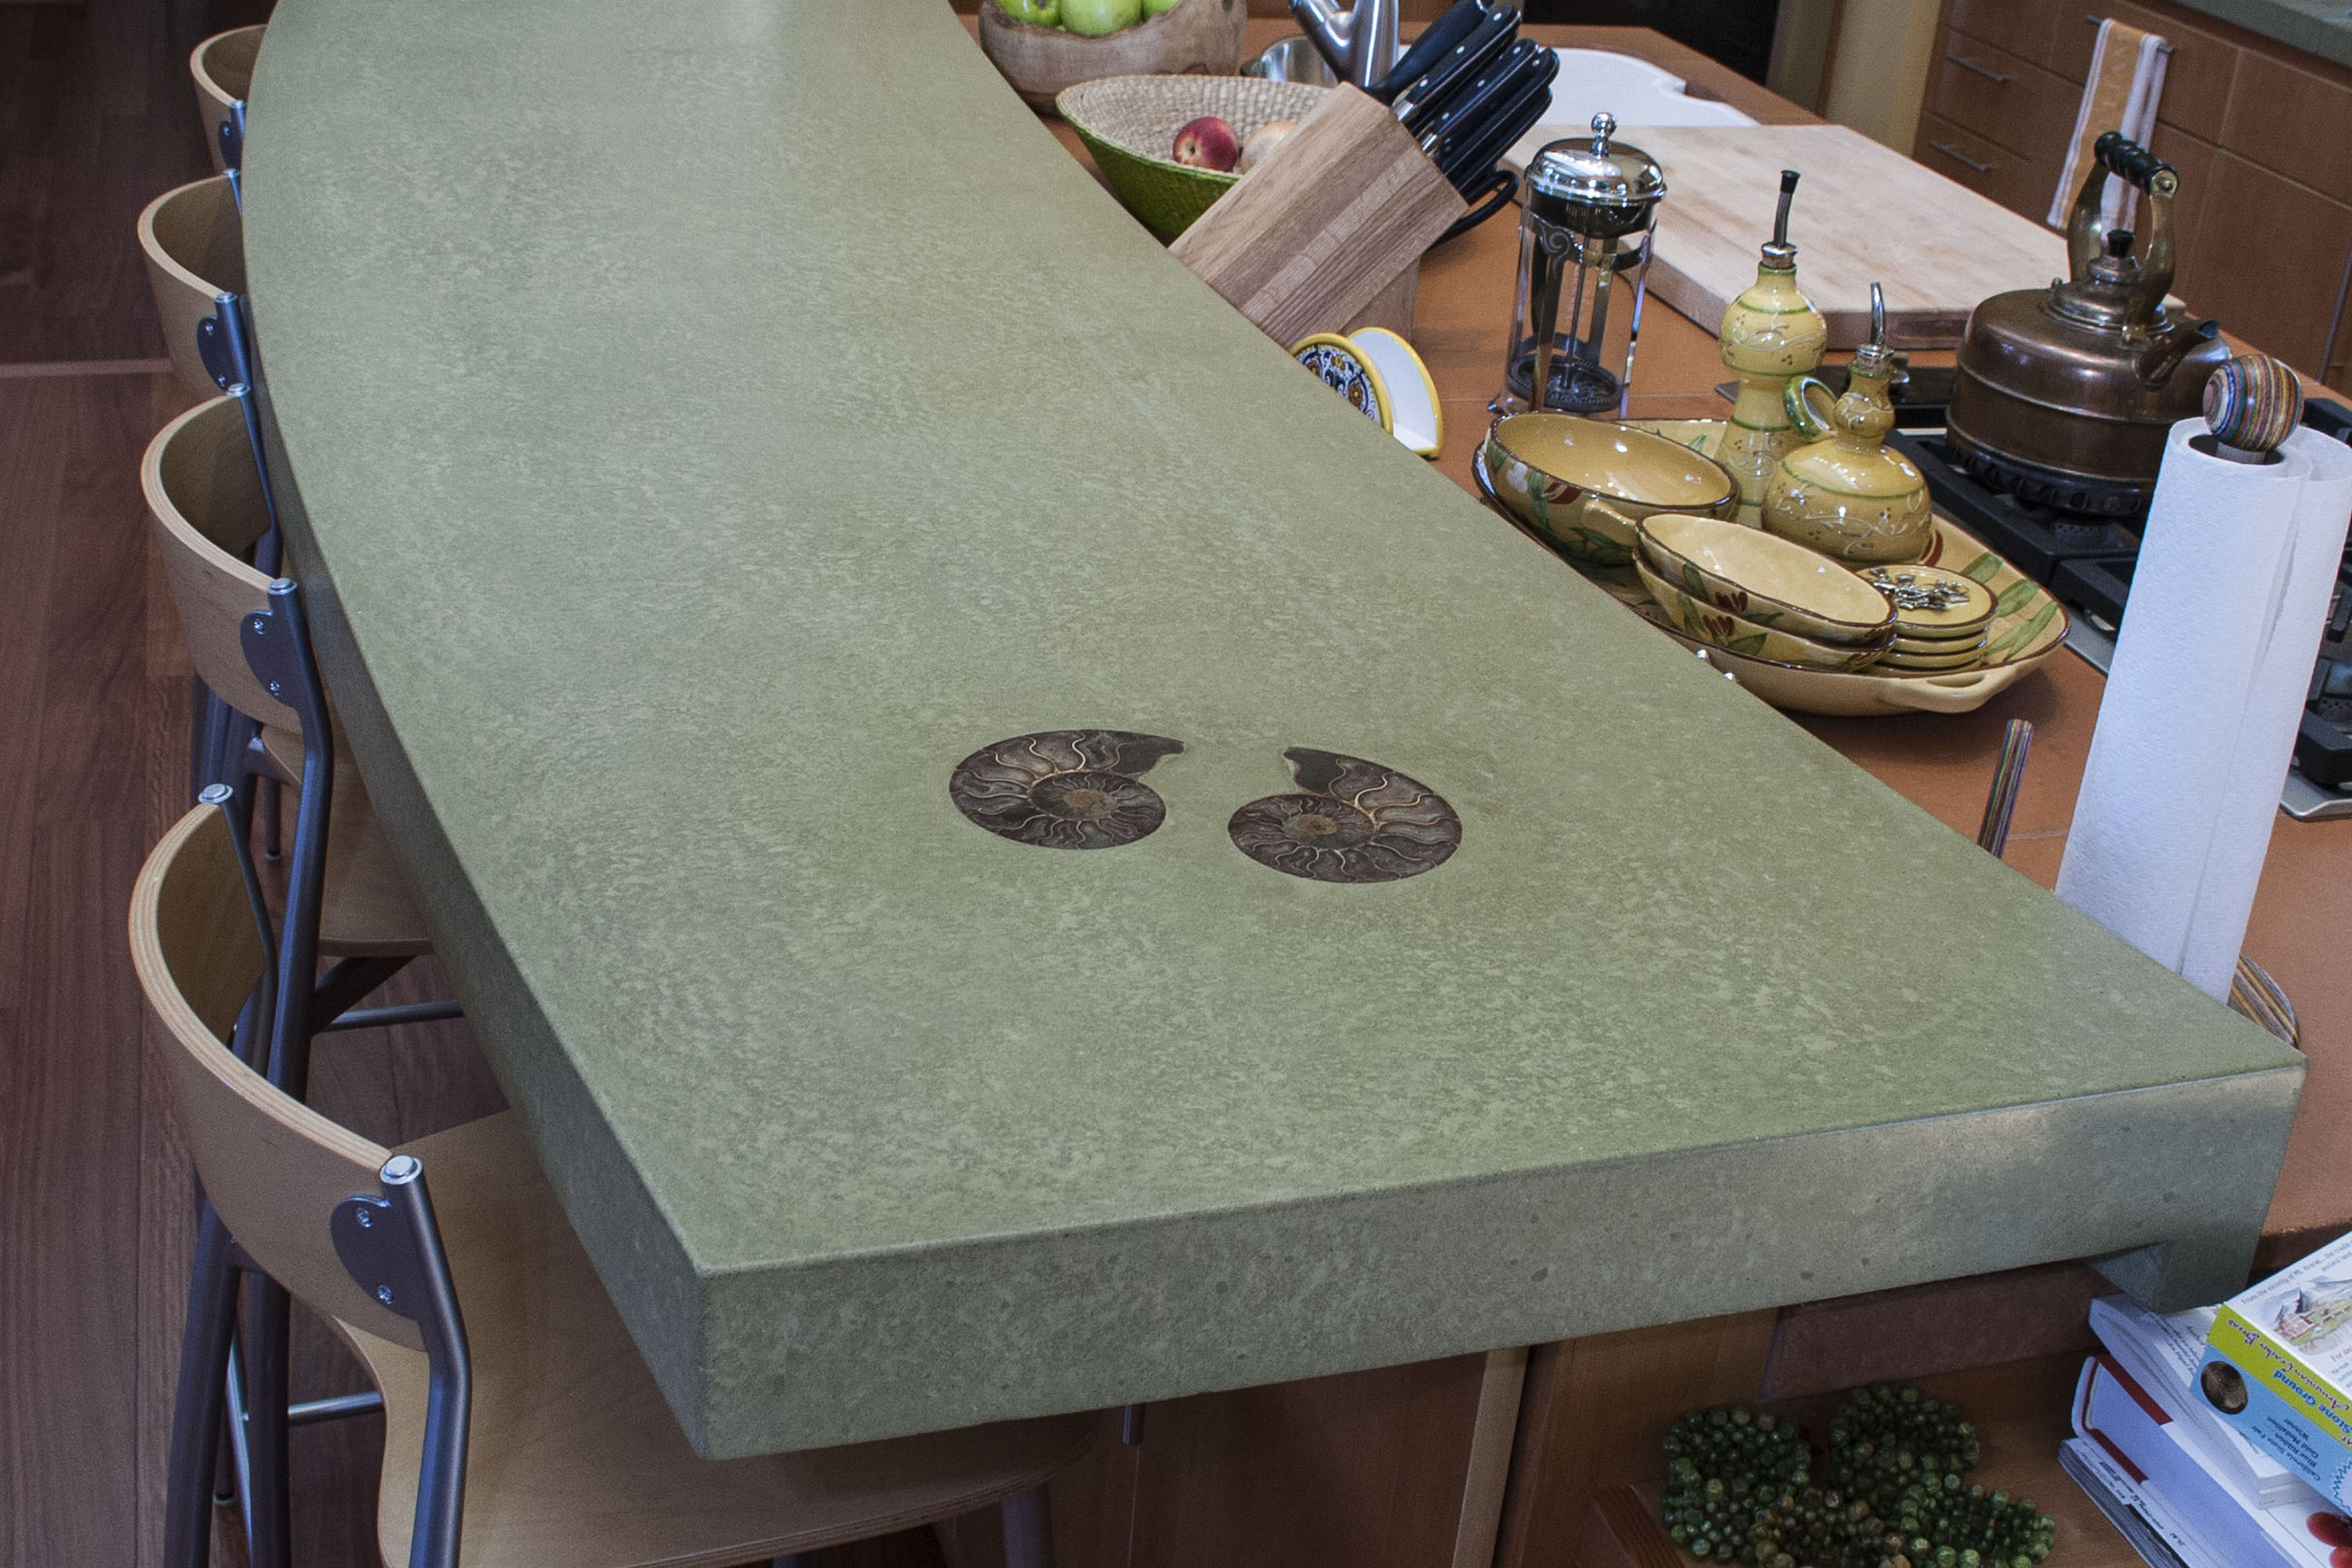 Concrete Countertop with Nautilus Shell Embad